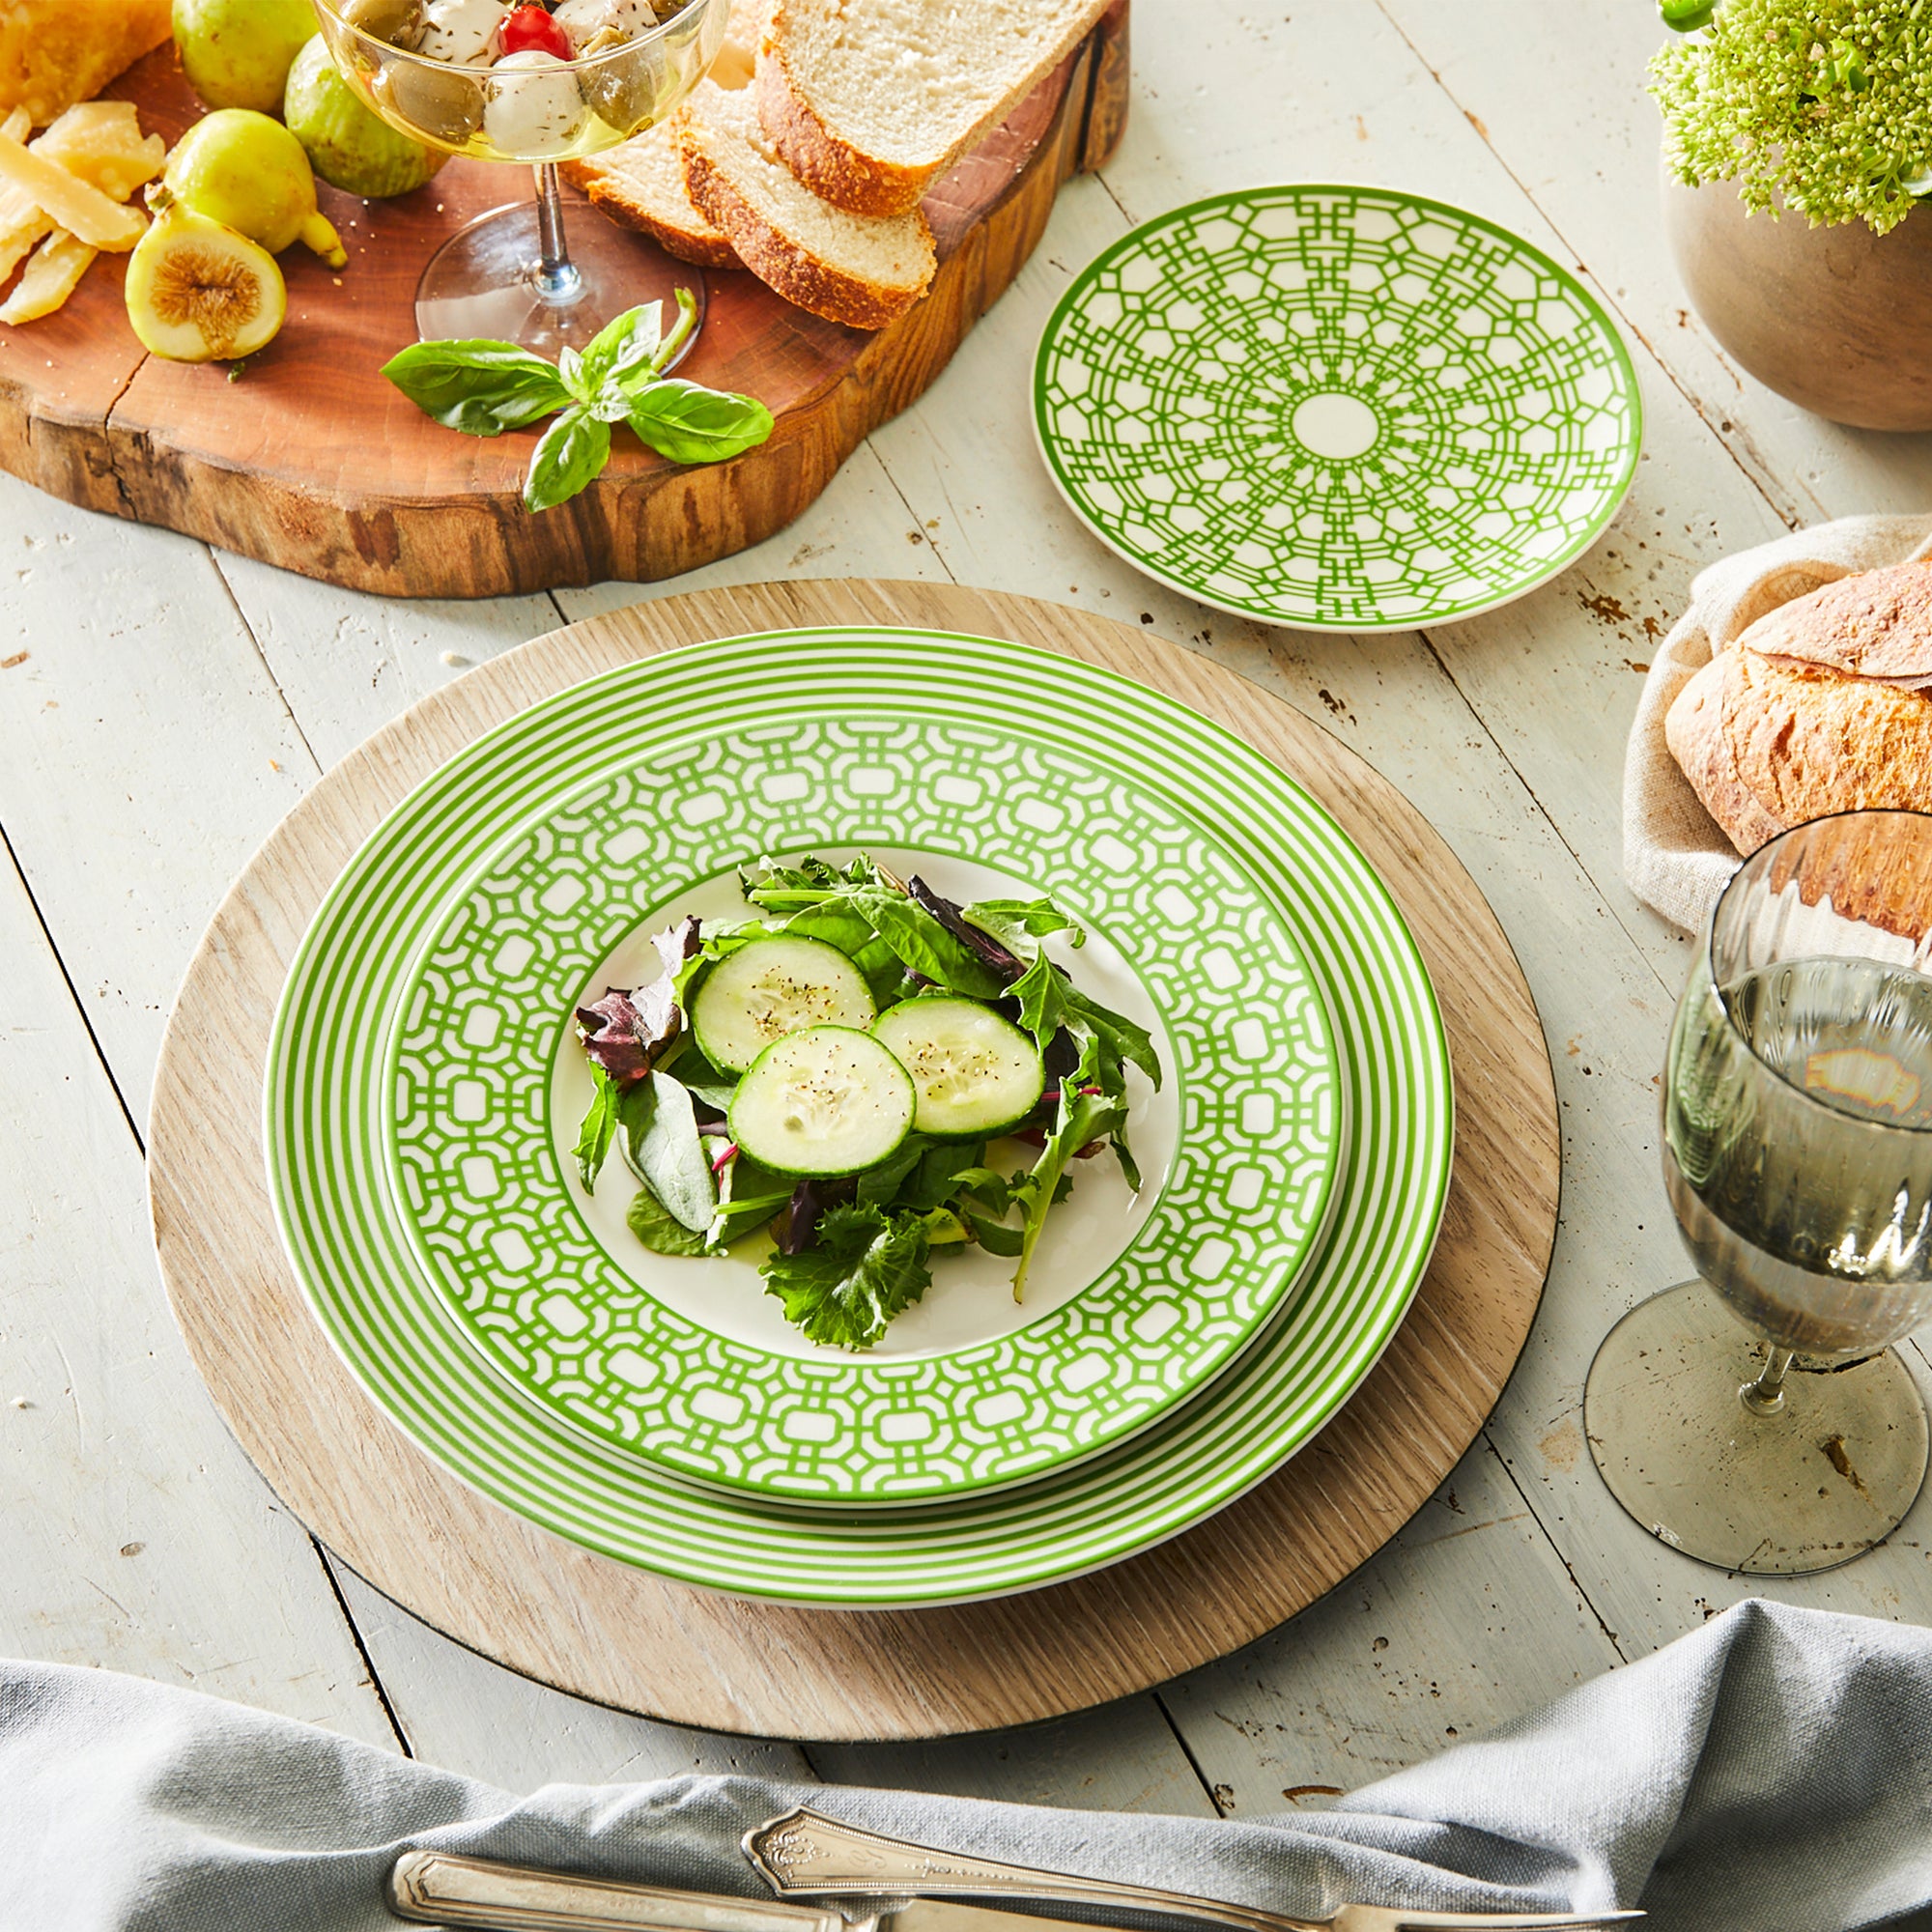 Four round, white plates crafted from premium porcelain feature intricate green geometric patterns and are arranged in a staggered formation against a white background. These heirloom-quality dinnerware pieces belong to the exquisite Newport Verde Small Plates collection by Caskata Artisanal Home.